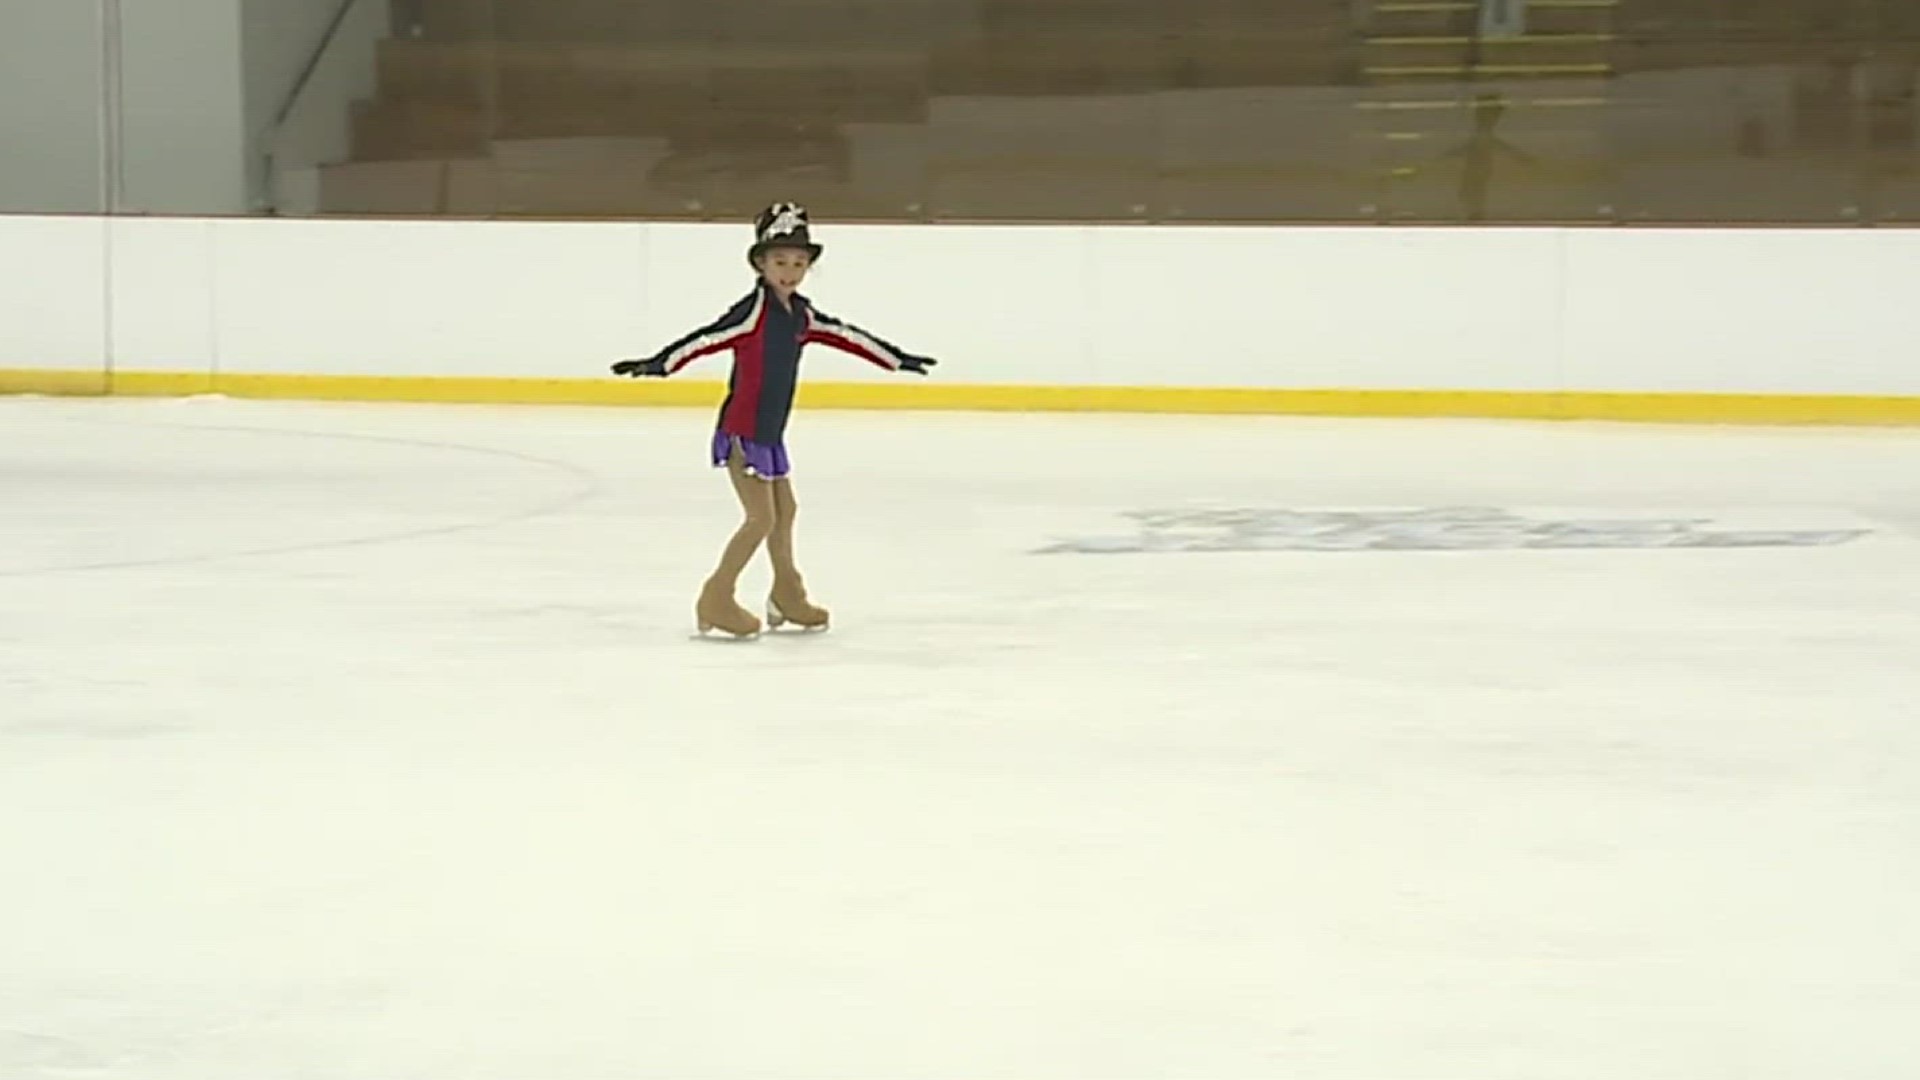 7 York figure skaters compete in Boston National Showcase